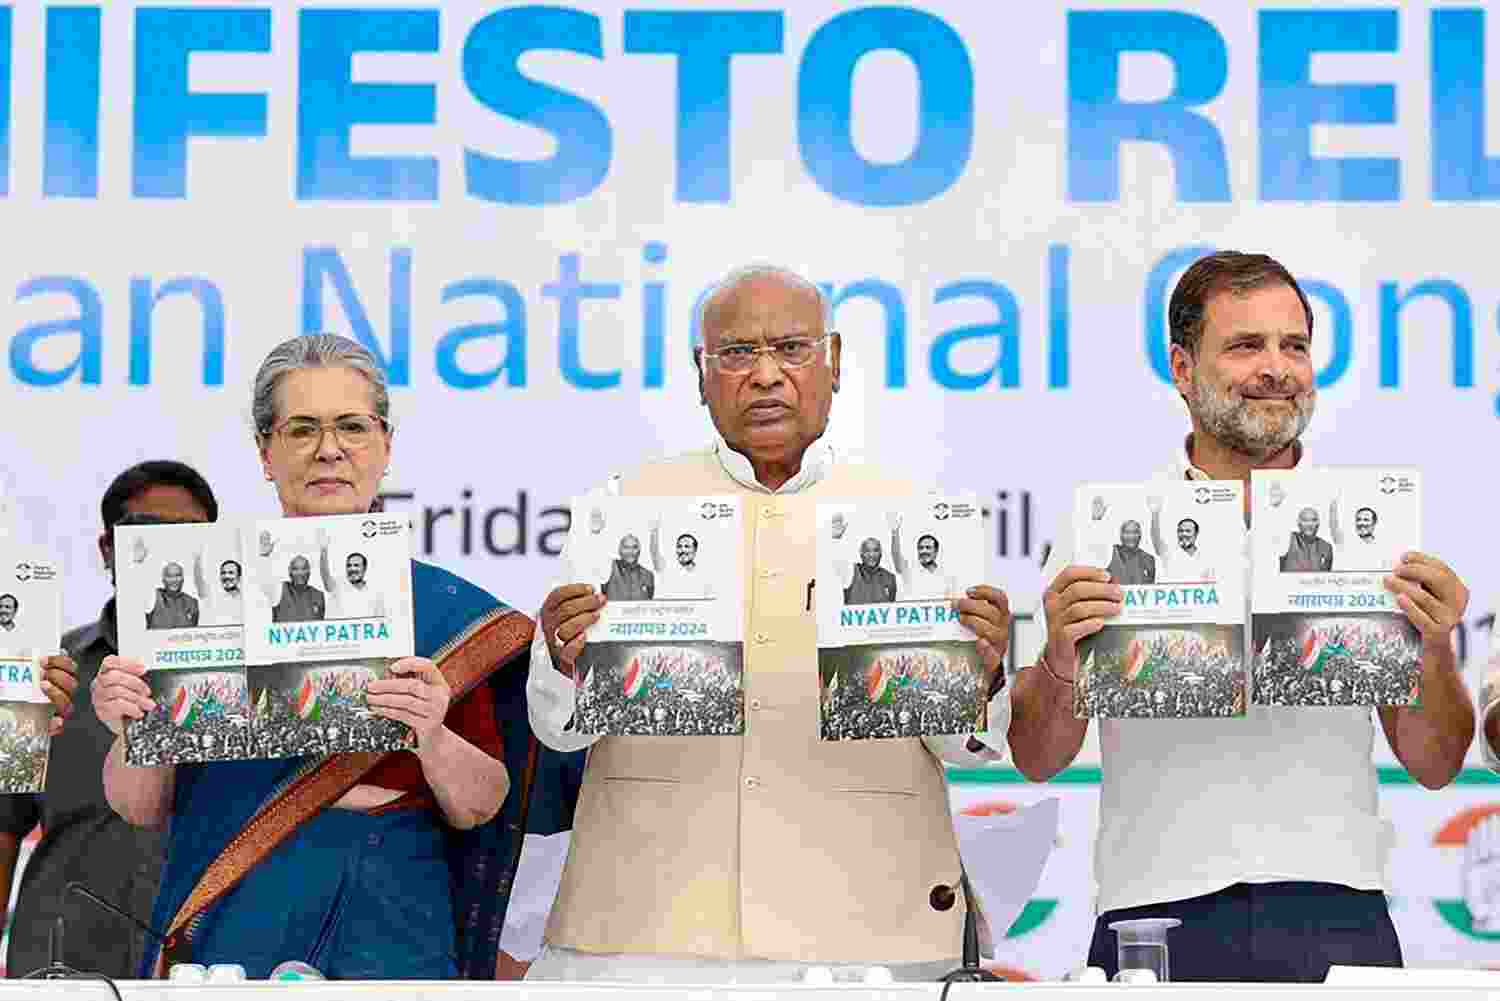 Congress promises civil union recognition for LGBTQIA+ couples in election manifesto